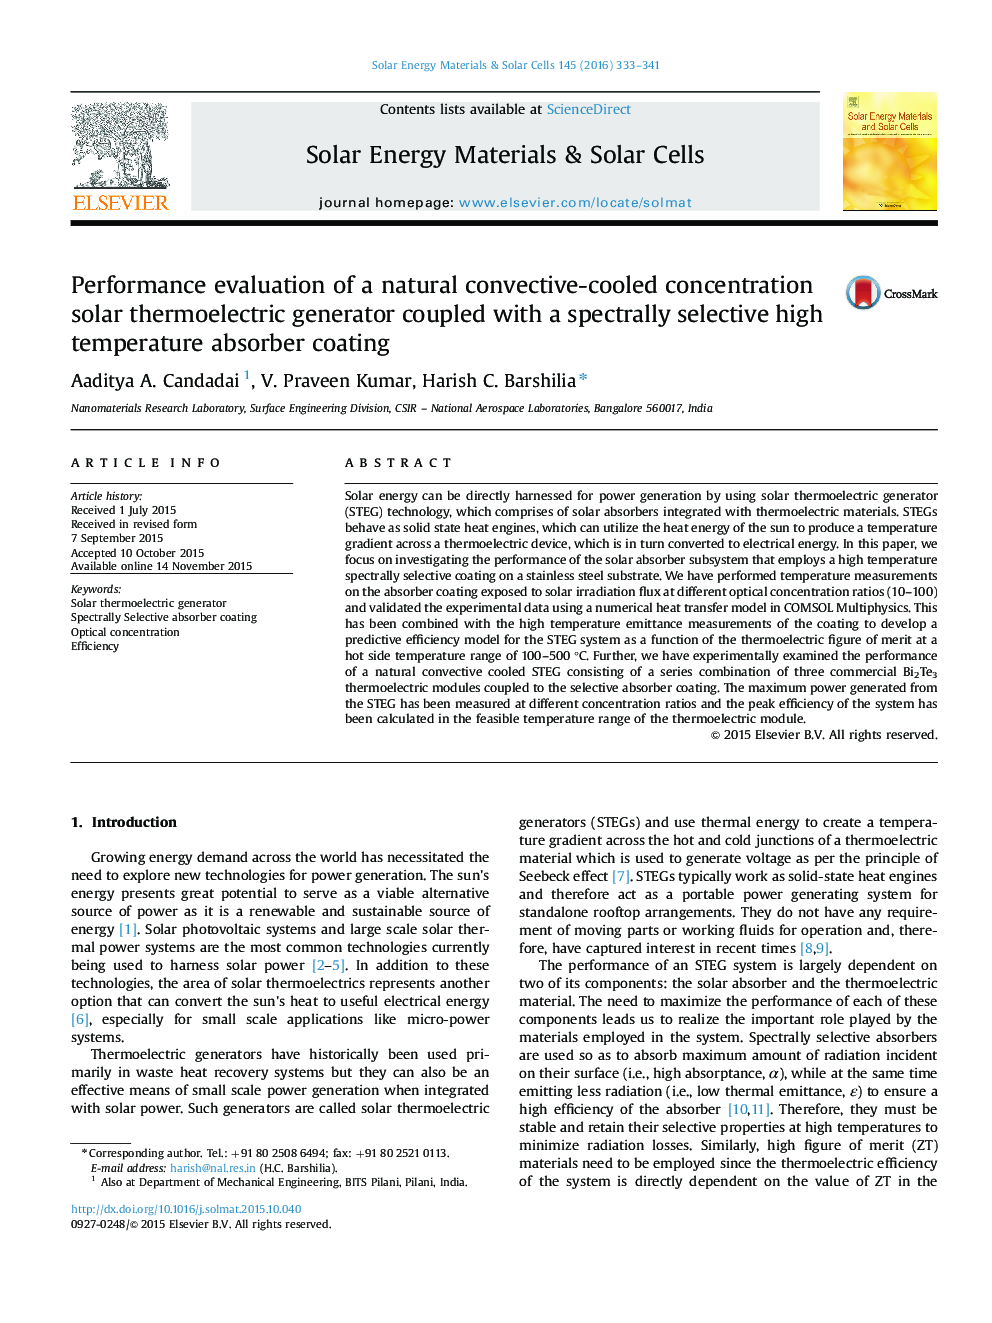 Performance evaluation of a natural convective-cooled concentration solar thermoelectric generator coupled with a spectrally selective high temperature absorber coating